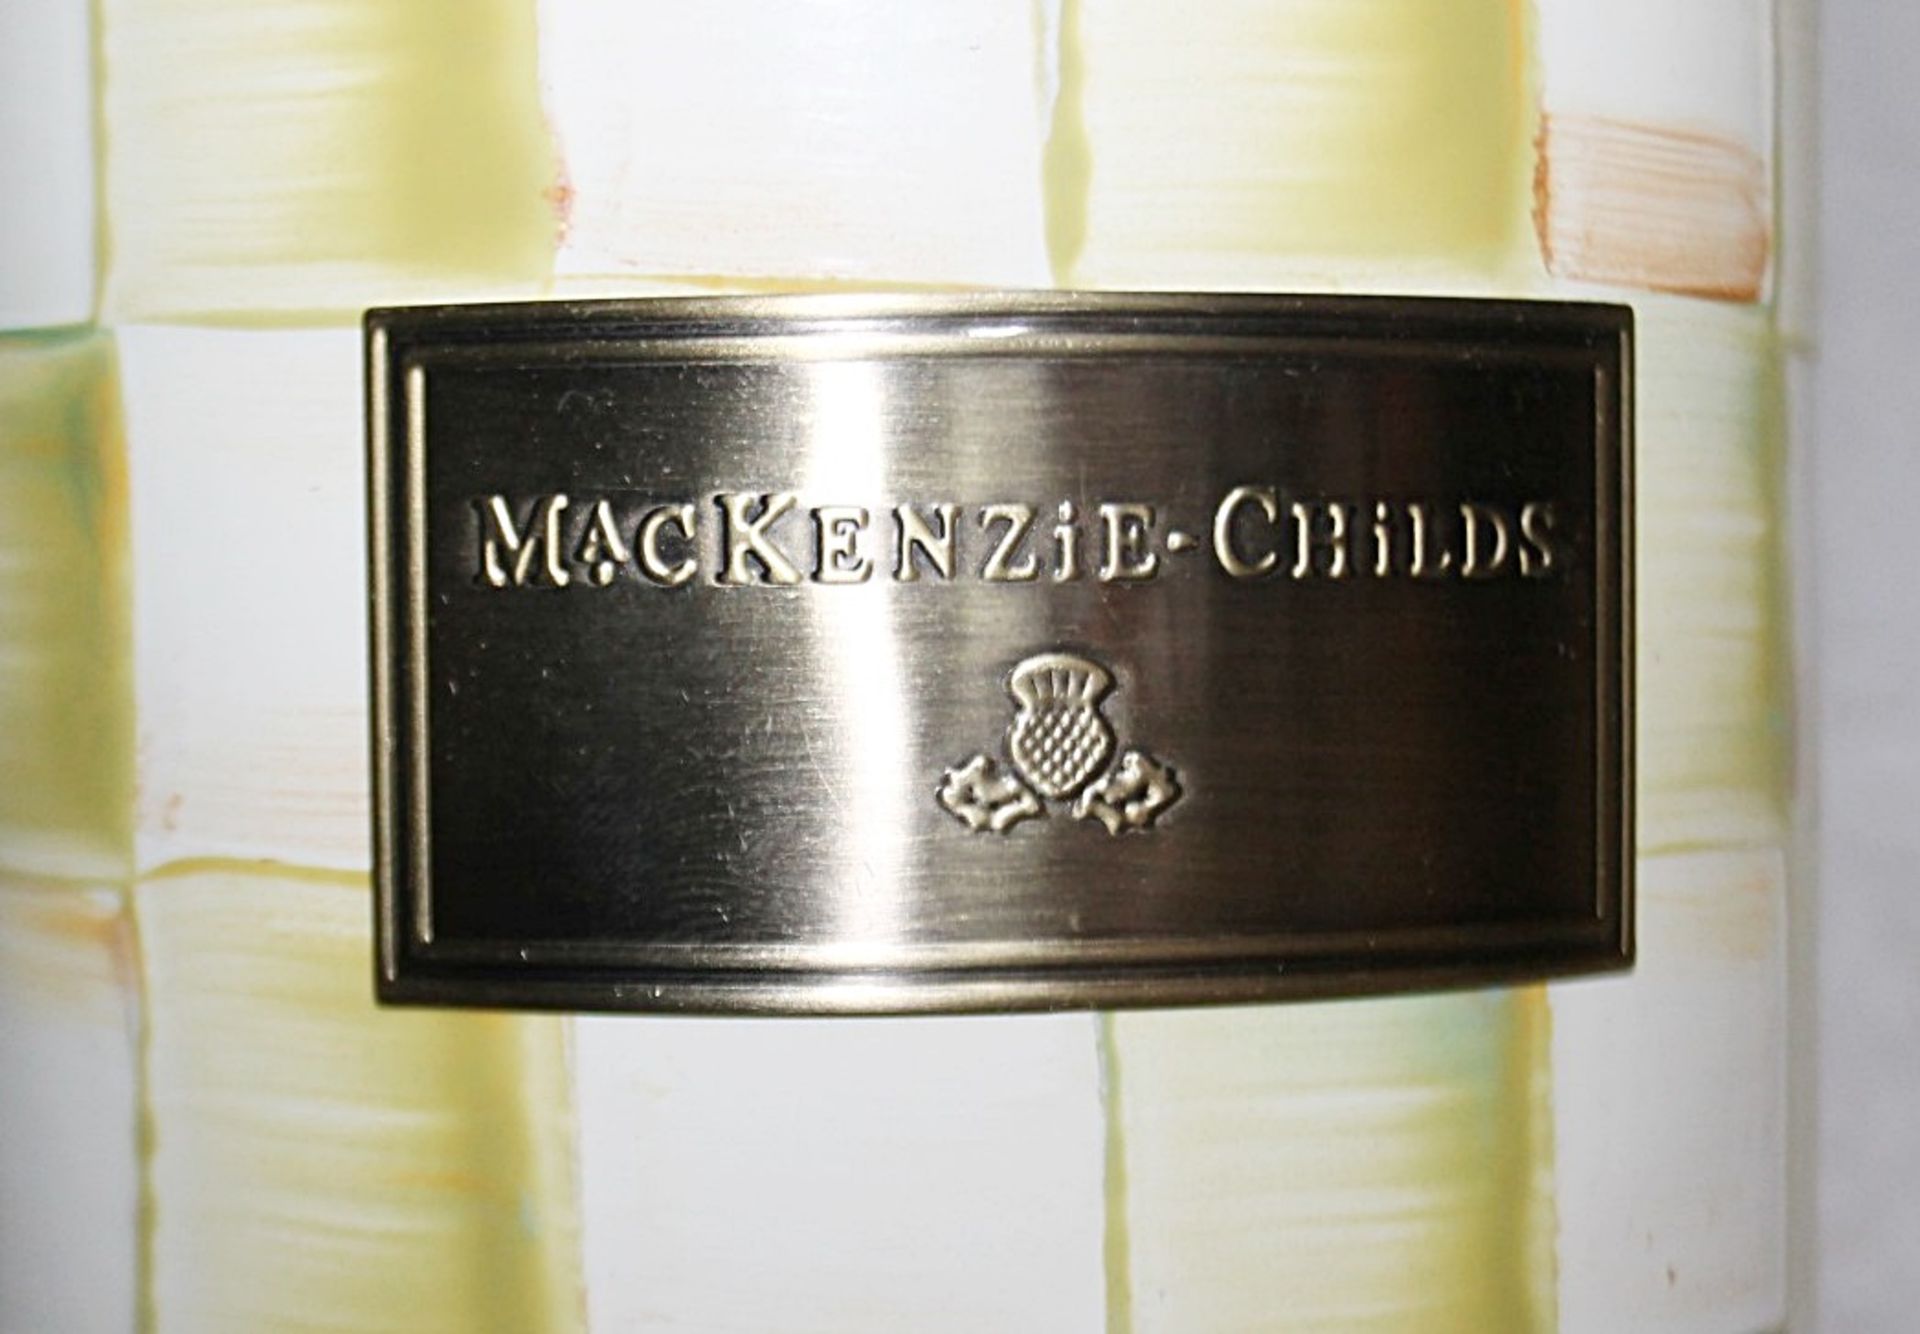 1 x MACKENZIE-CHILDS Small Parchment Check Enamel Canister - Original Price £97.00 - Ref: HAR280/ - Image 8 of 9